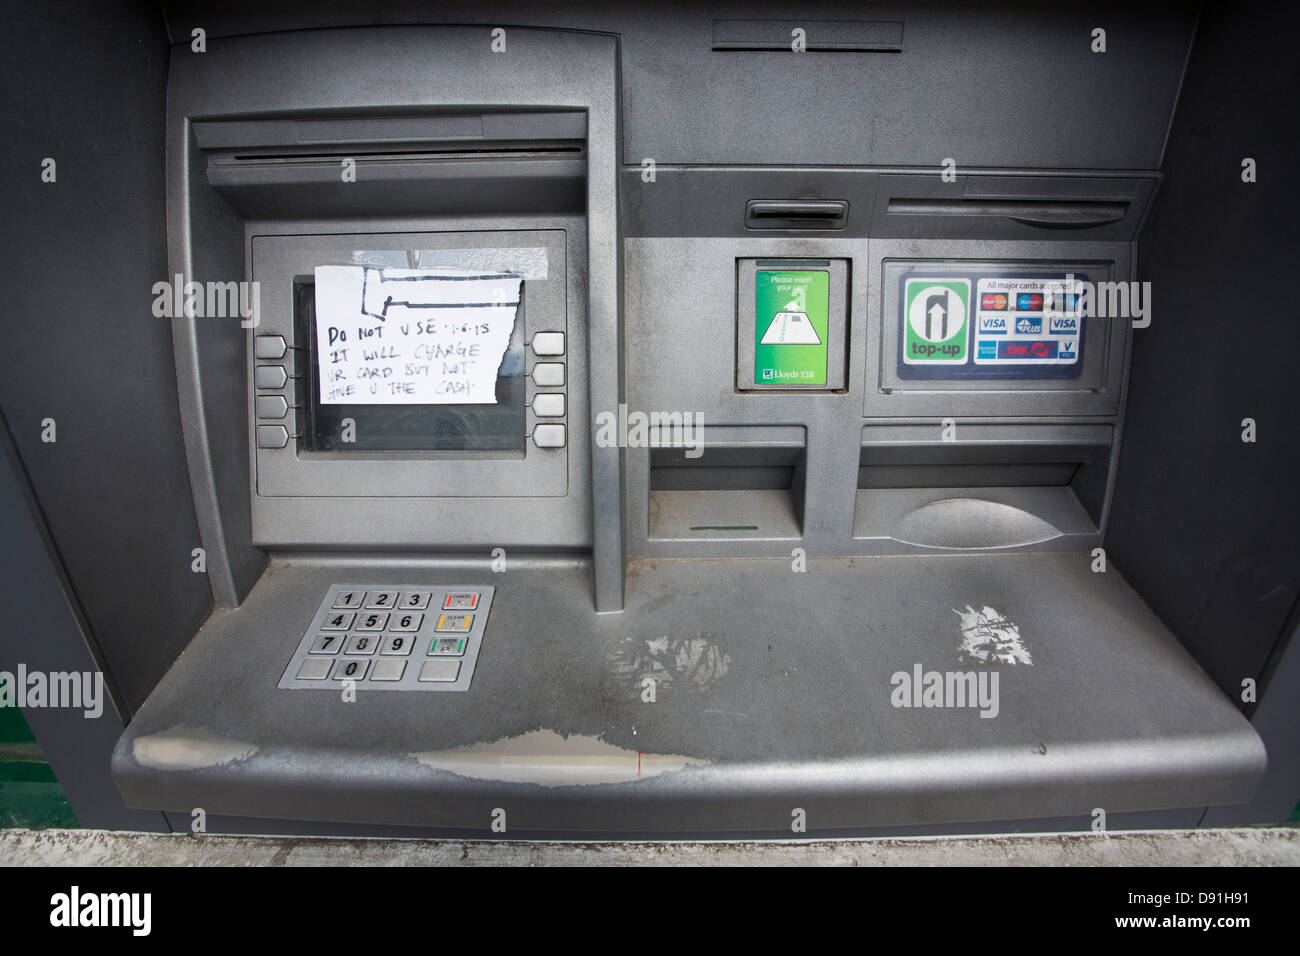 Out of order cash machine ATM with a hand written note covering the screen warning against using a bank card to withdraw money. Stock Photo